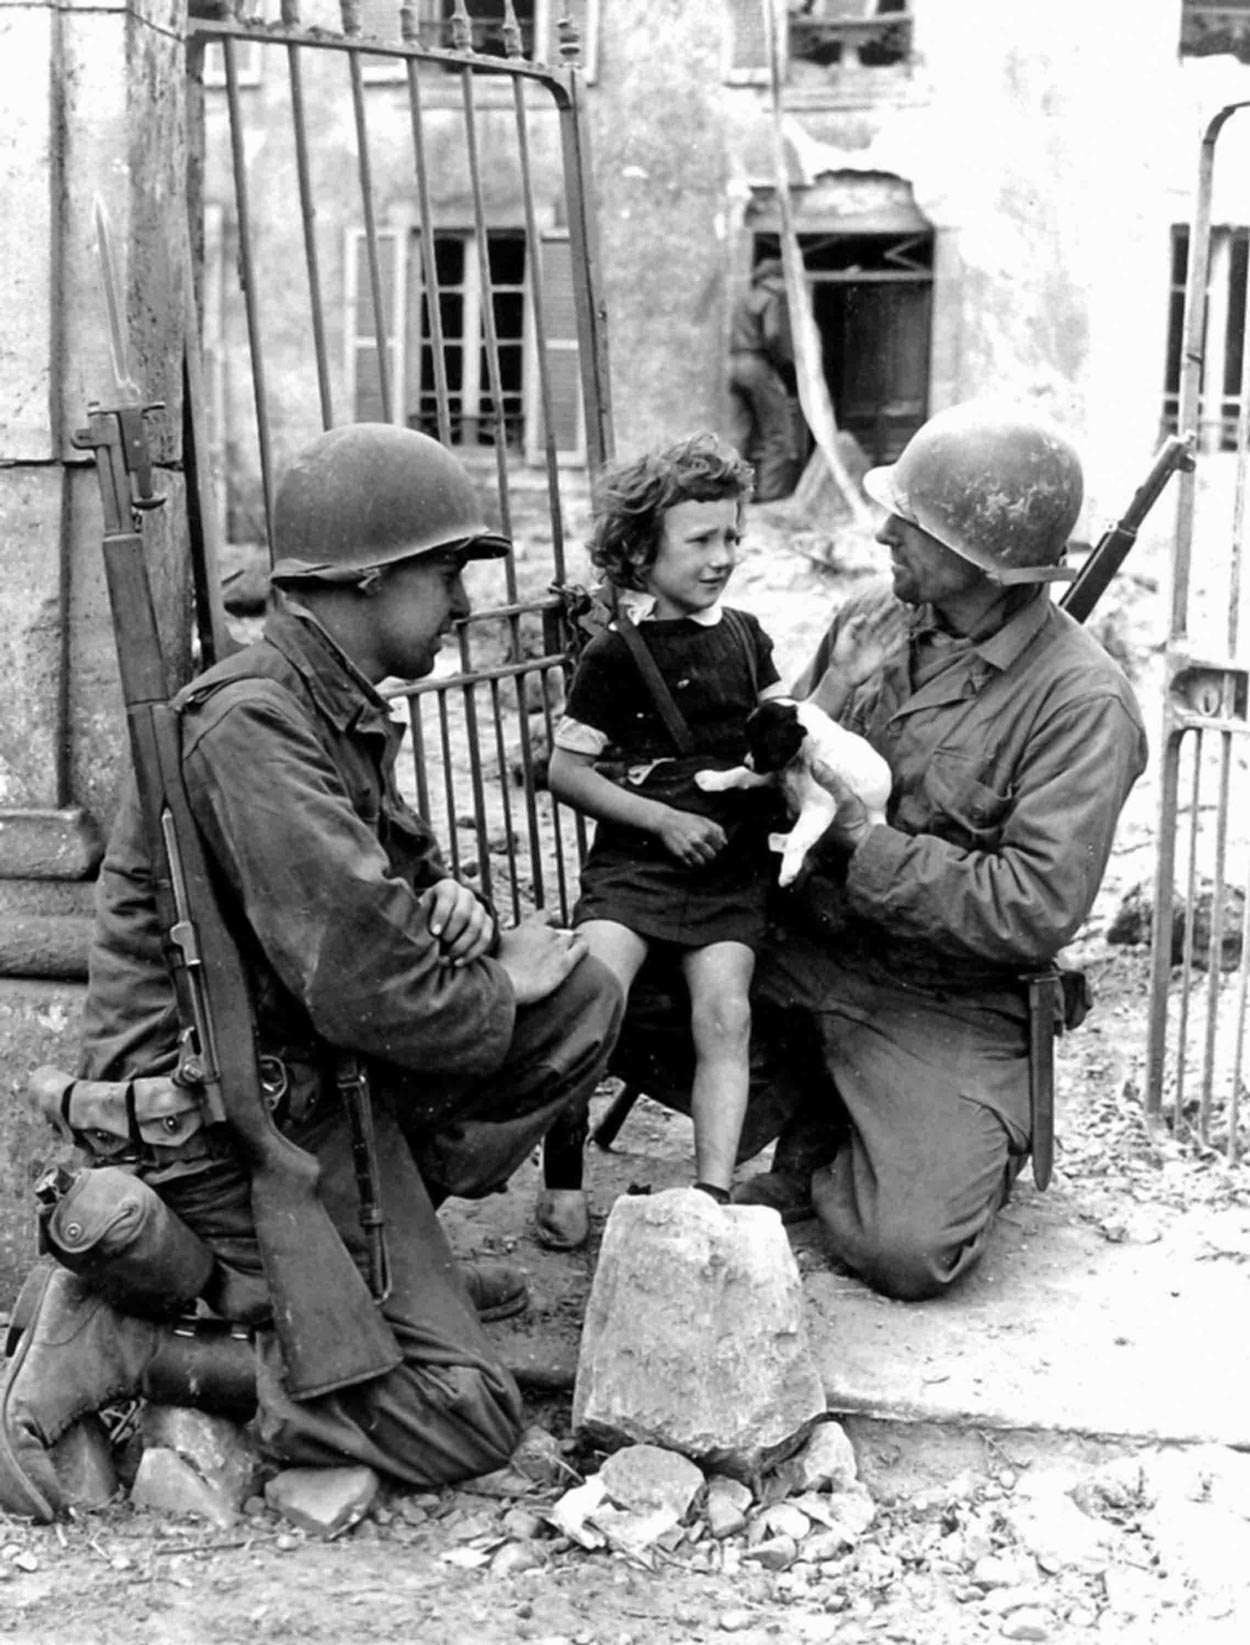 Black and white image of two soldiers holding a little girl and puppy.